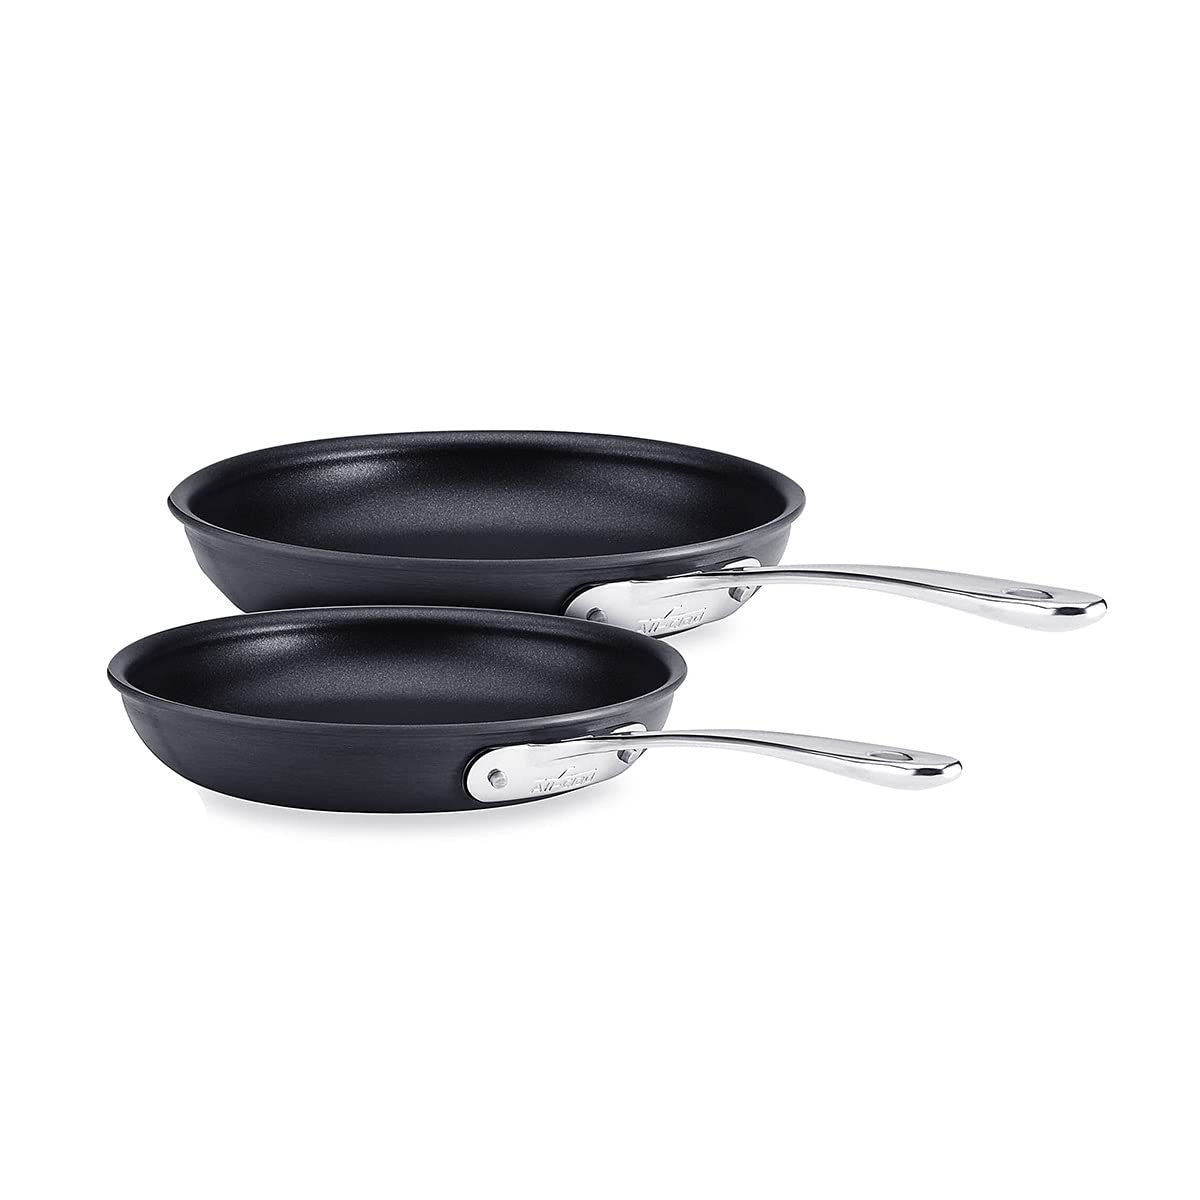 GreenPan cookware Prime Day deal: Save $55 on Reviewed-approved